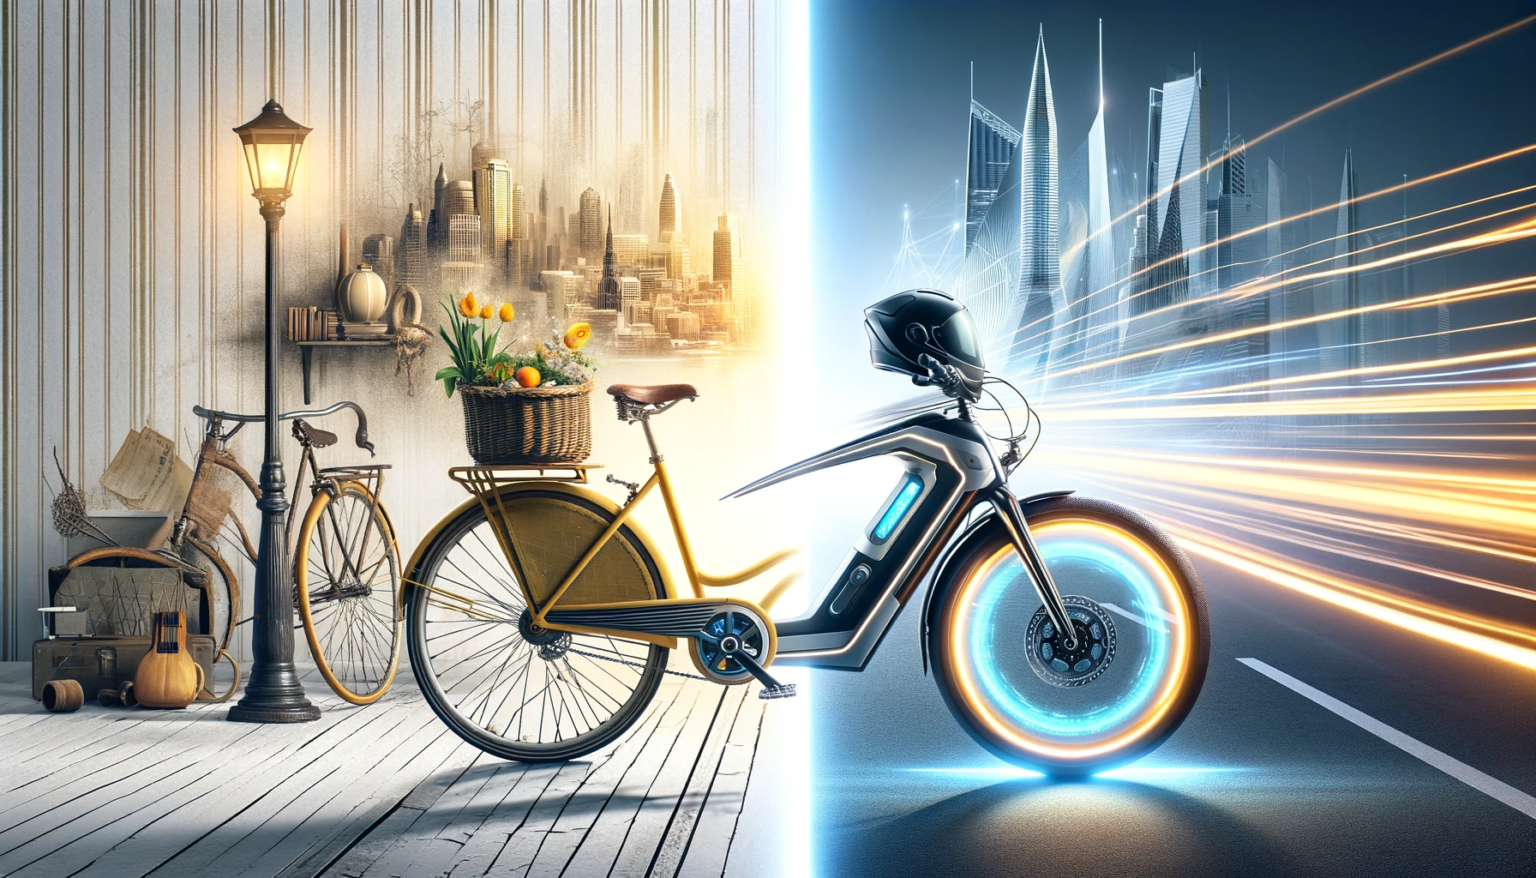 A creative representation of a bicycle split down the middle, transitioning from a vintage yellow bike on the left to a sleek, modern electric bike on the right, against a white background with a futuristic cityscape